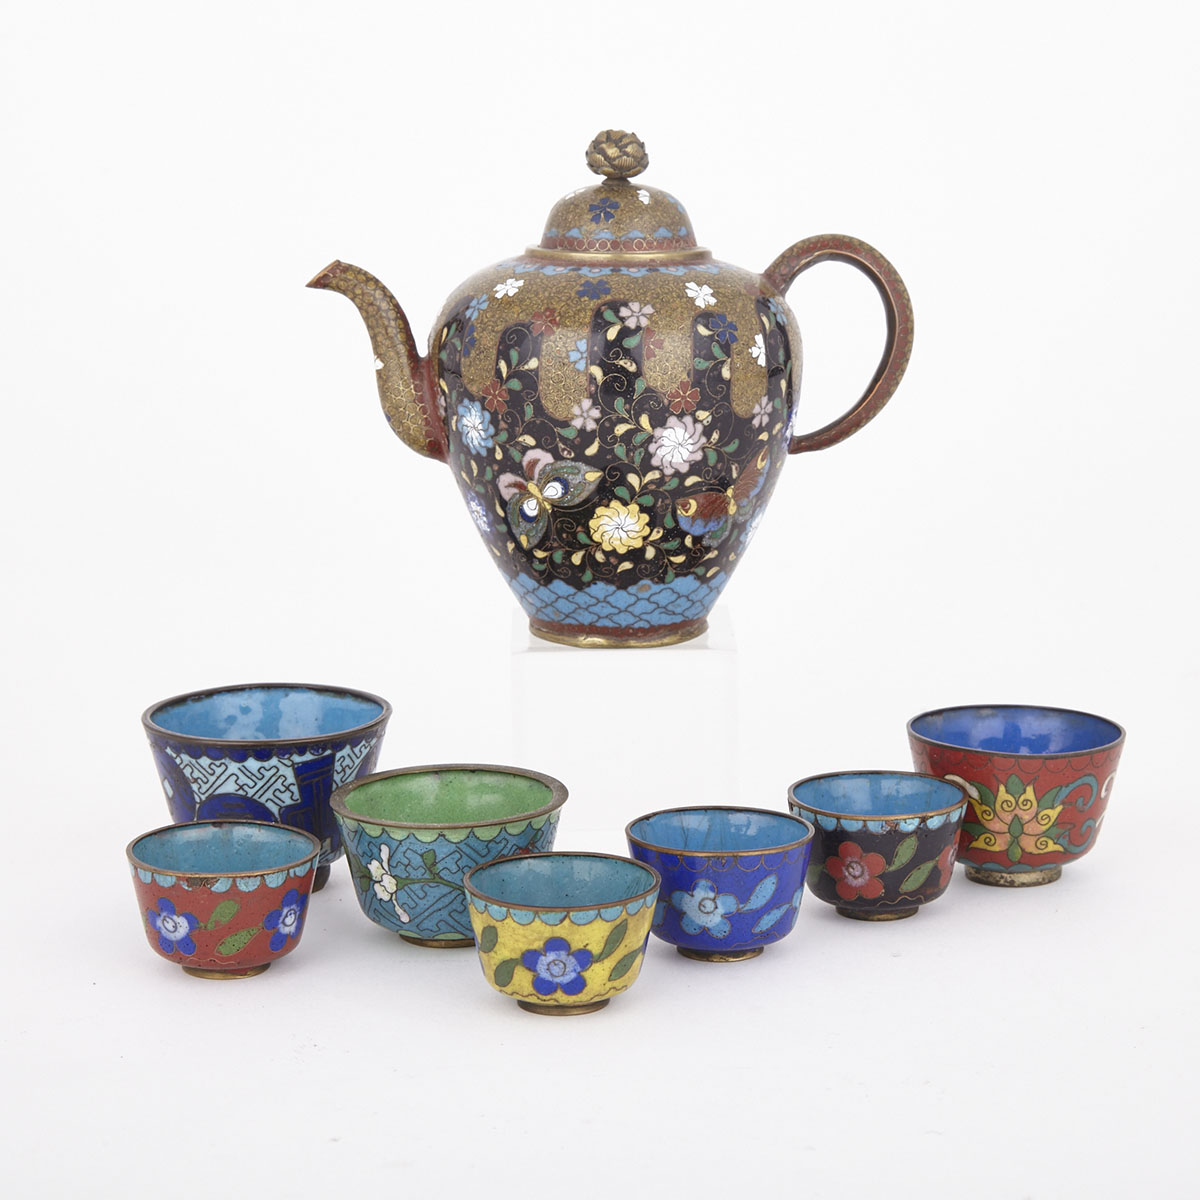 A Cloisonne Teapot together with Seven Closionne Cups, Early 20th Century